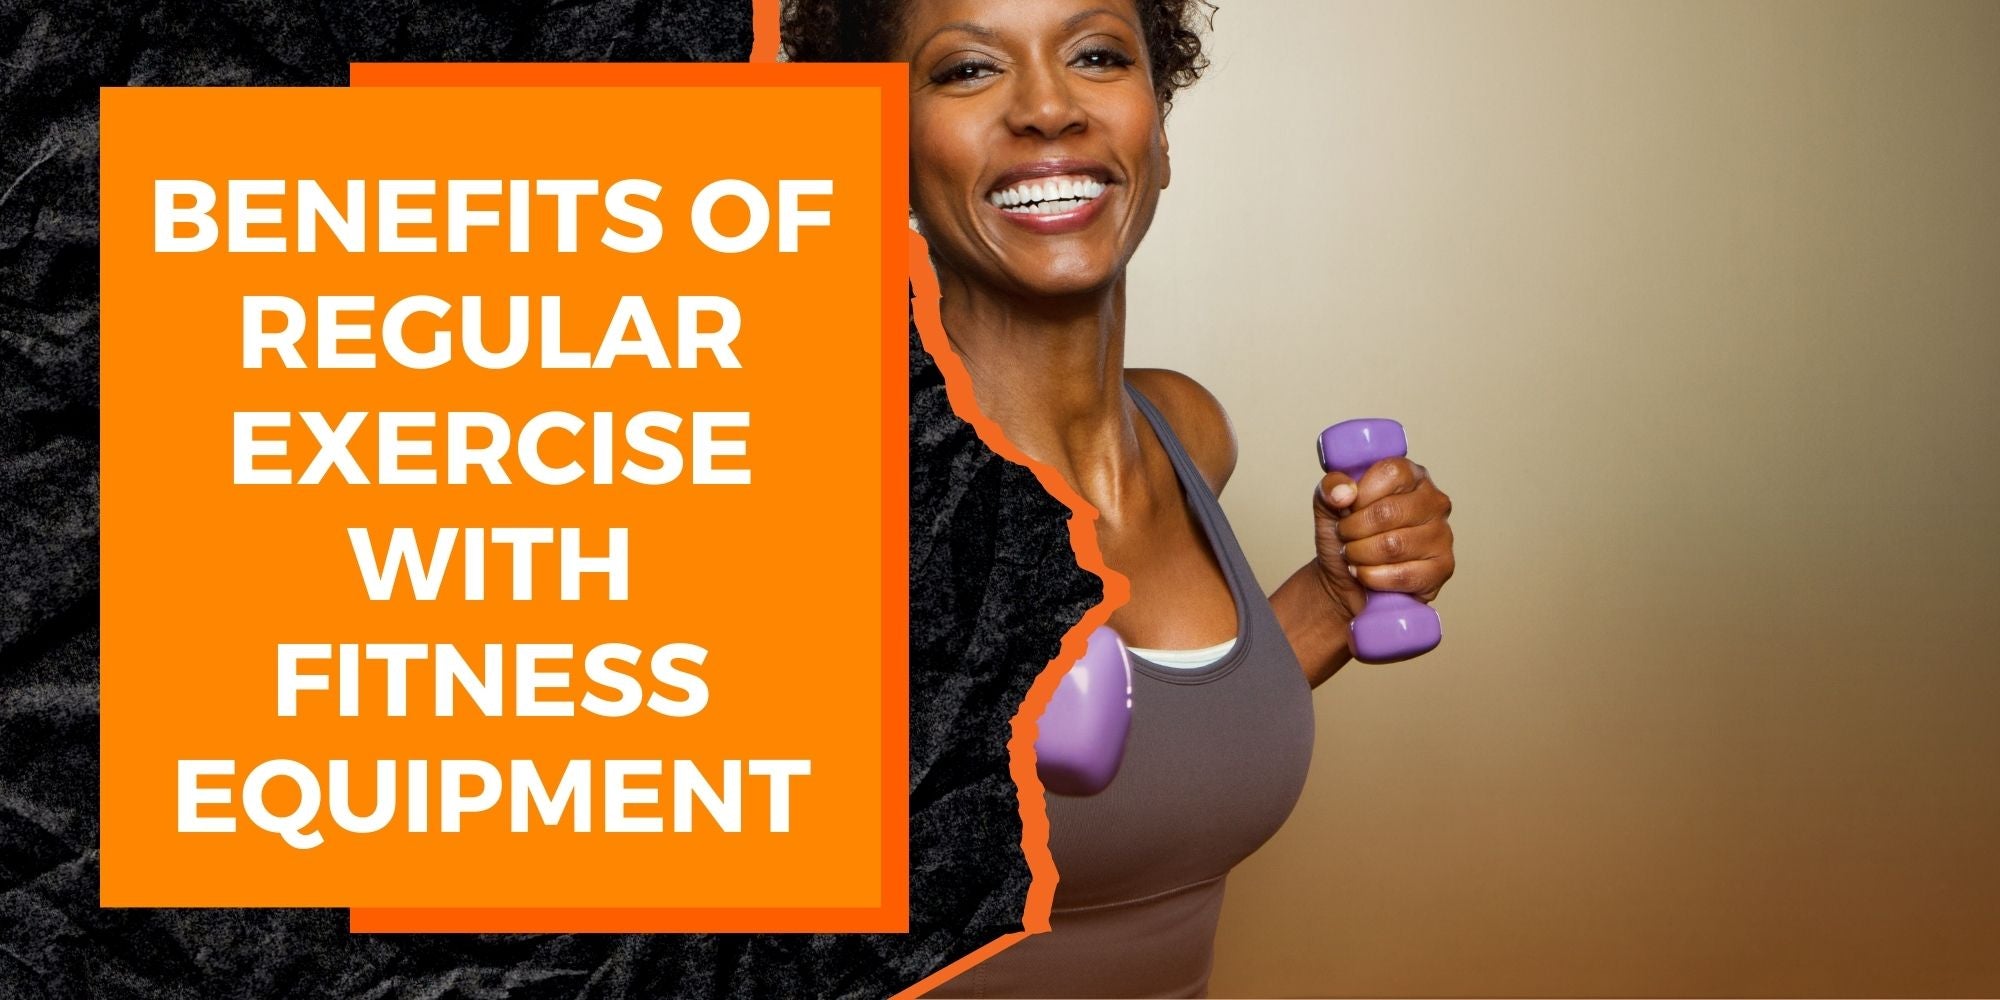 The Benefits of Regular Exercise with Fitness Equipment